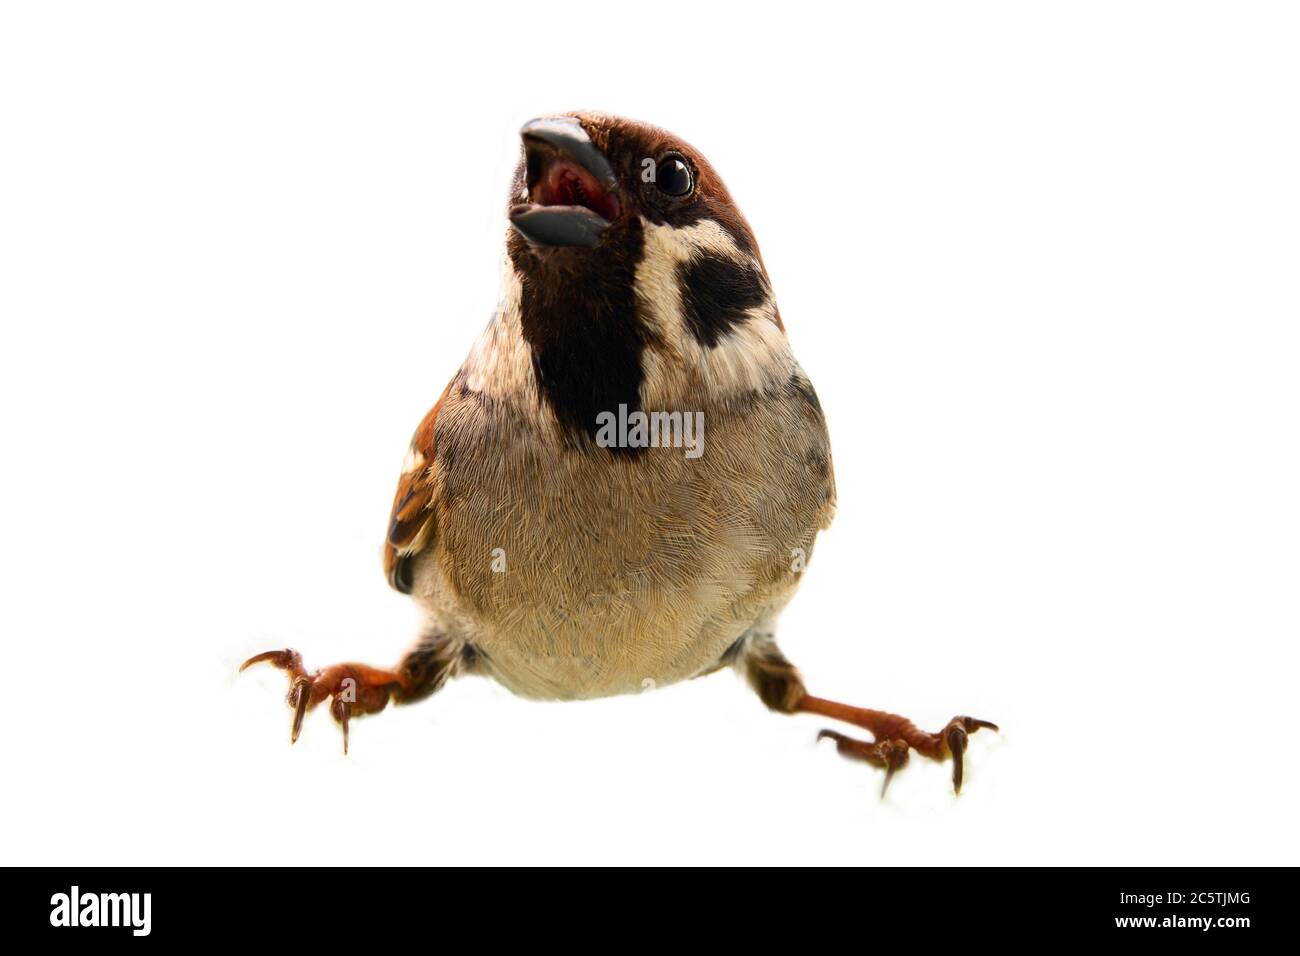 Sparrows as the most common birds in the human environment. Bird pokes in the lens, selective focus on cheeky eyes isolated on a white background Stock Photo